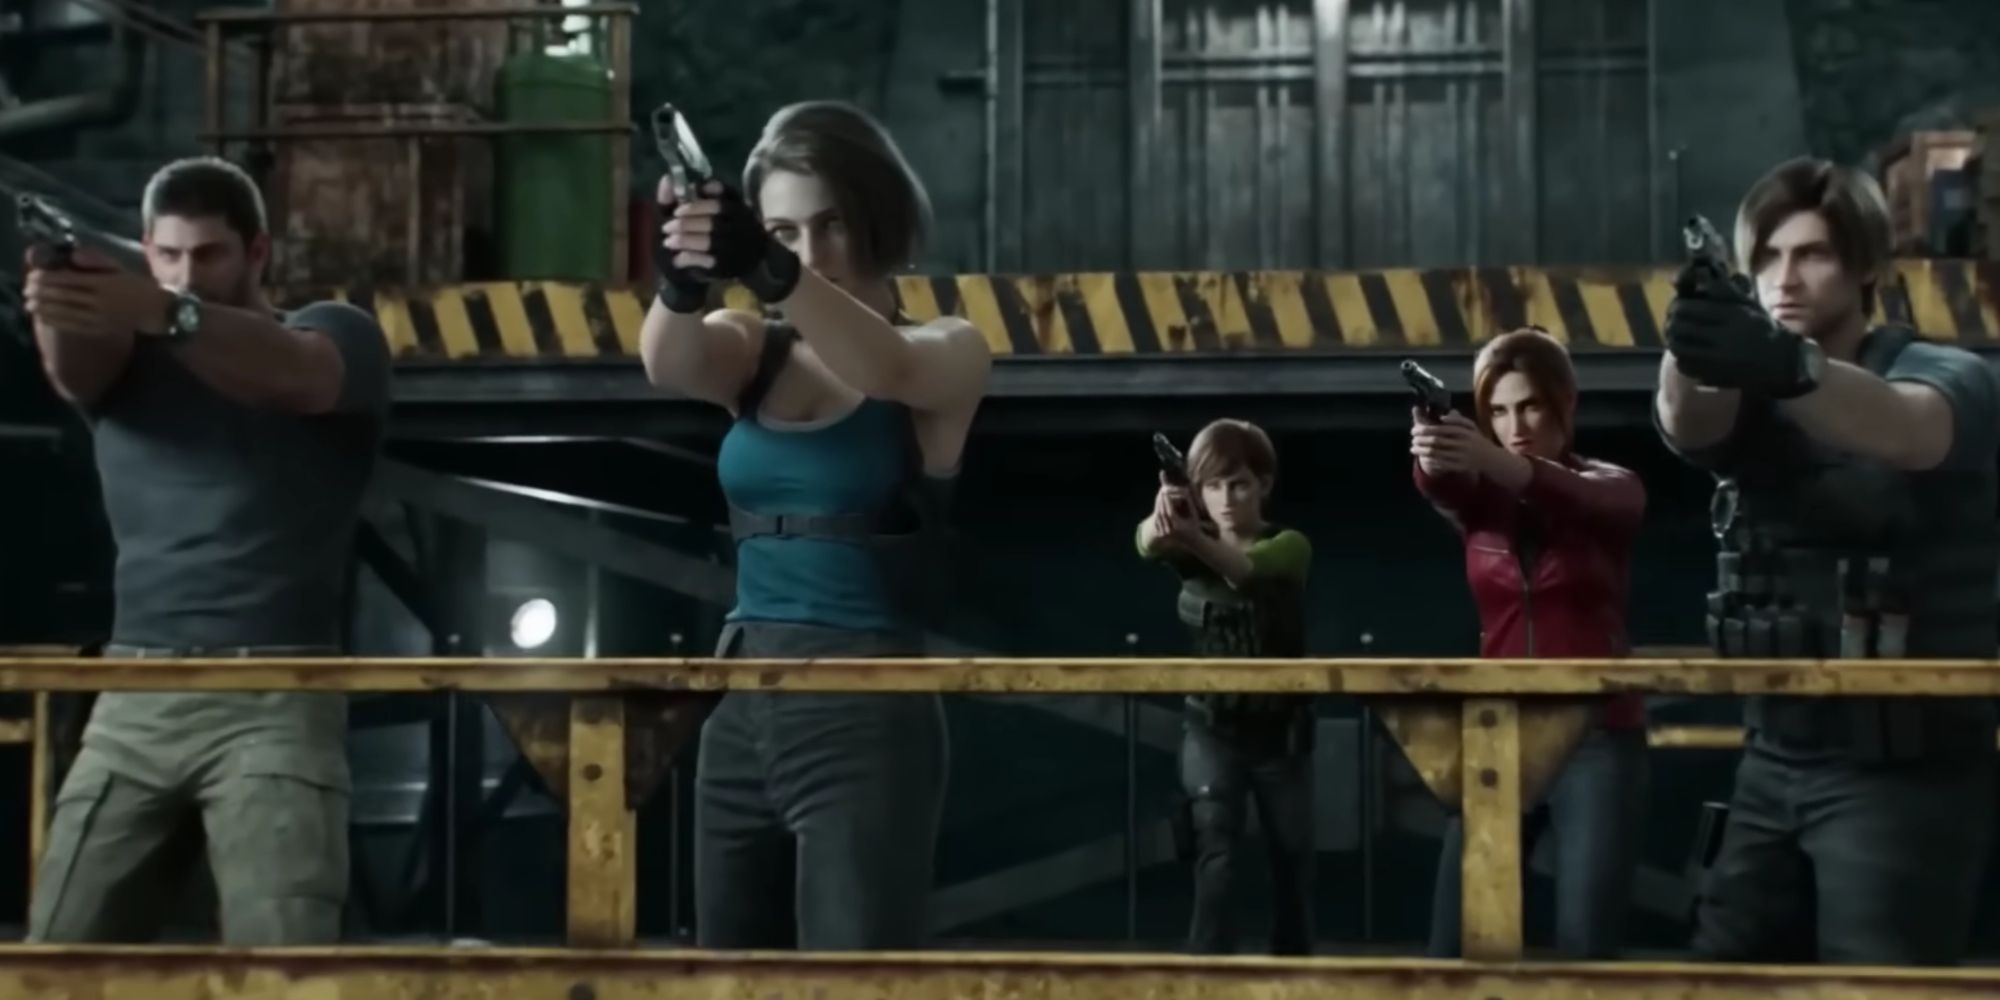 Chris, Jill, Leon, Claire, and Rebecca are next to each other, pointing guns at their opponents facing an Avengers-worthy moment.